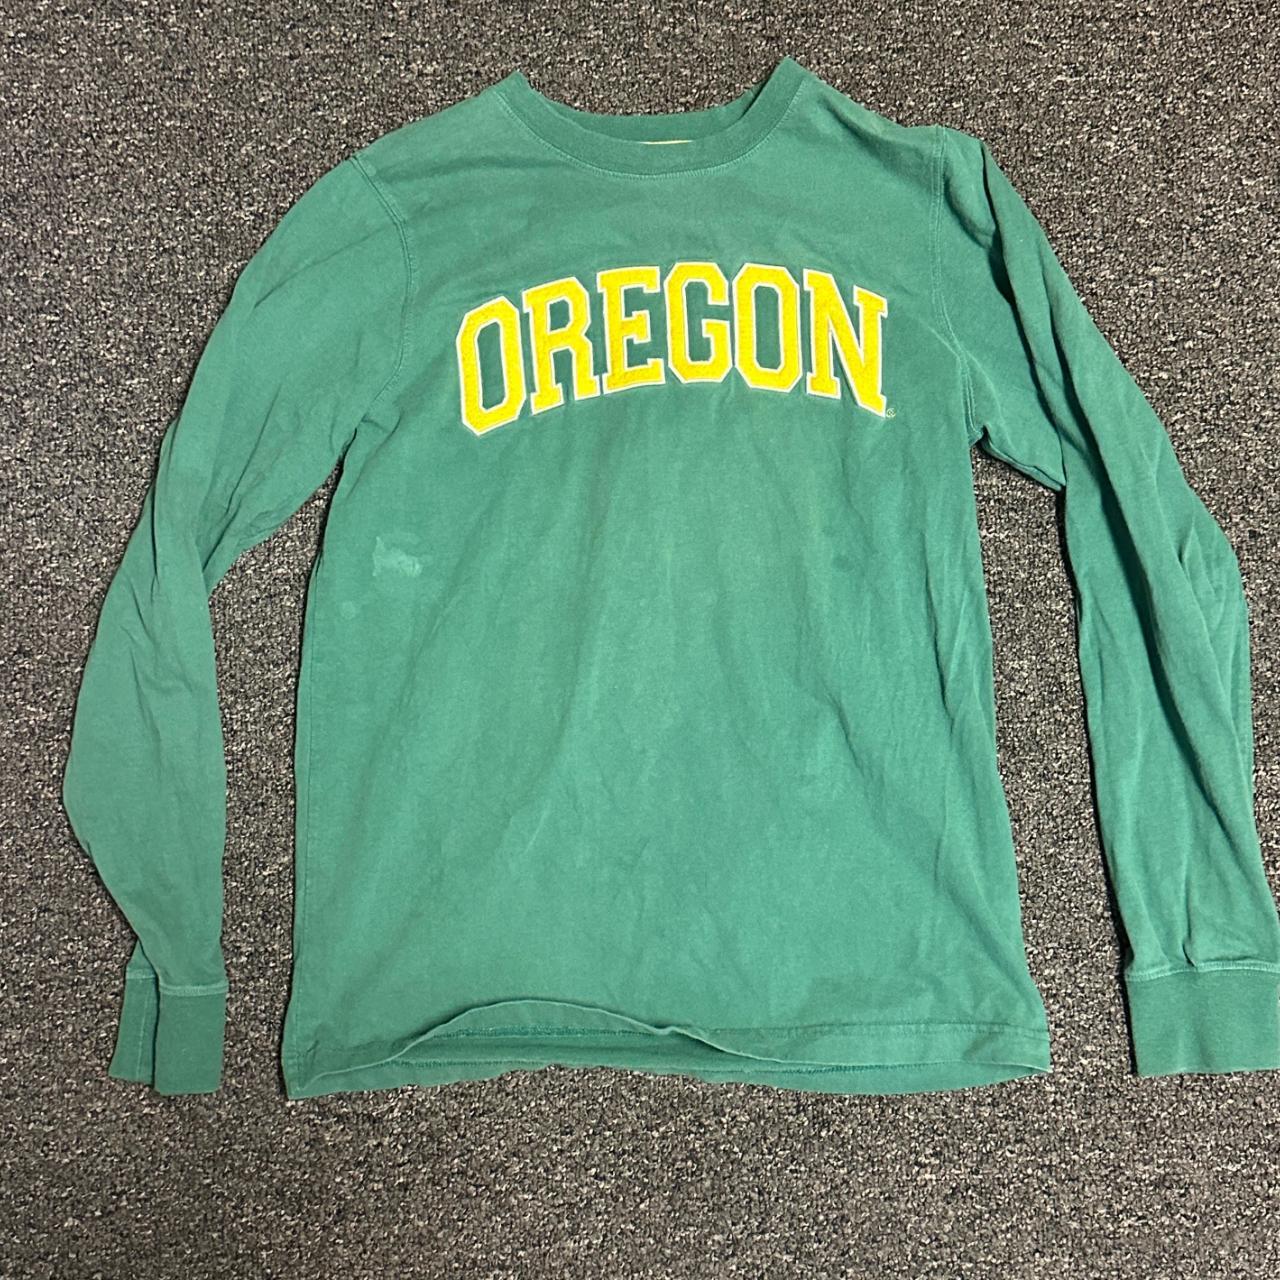 Minor Stain on Front - Depop